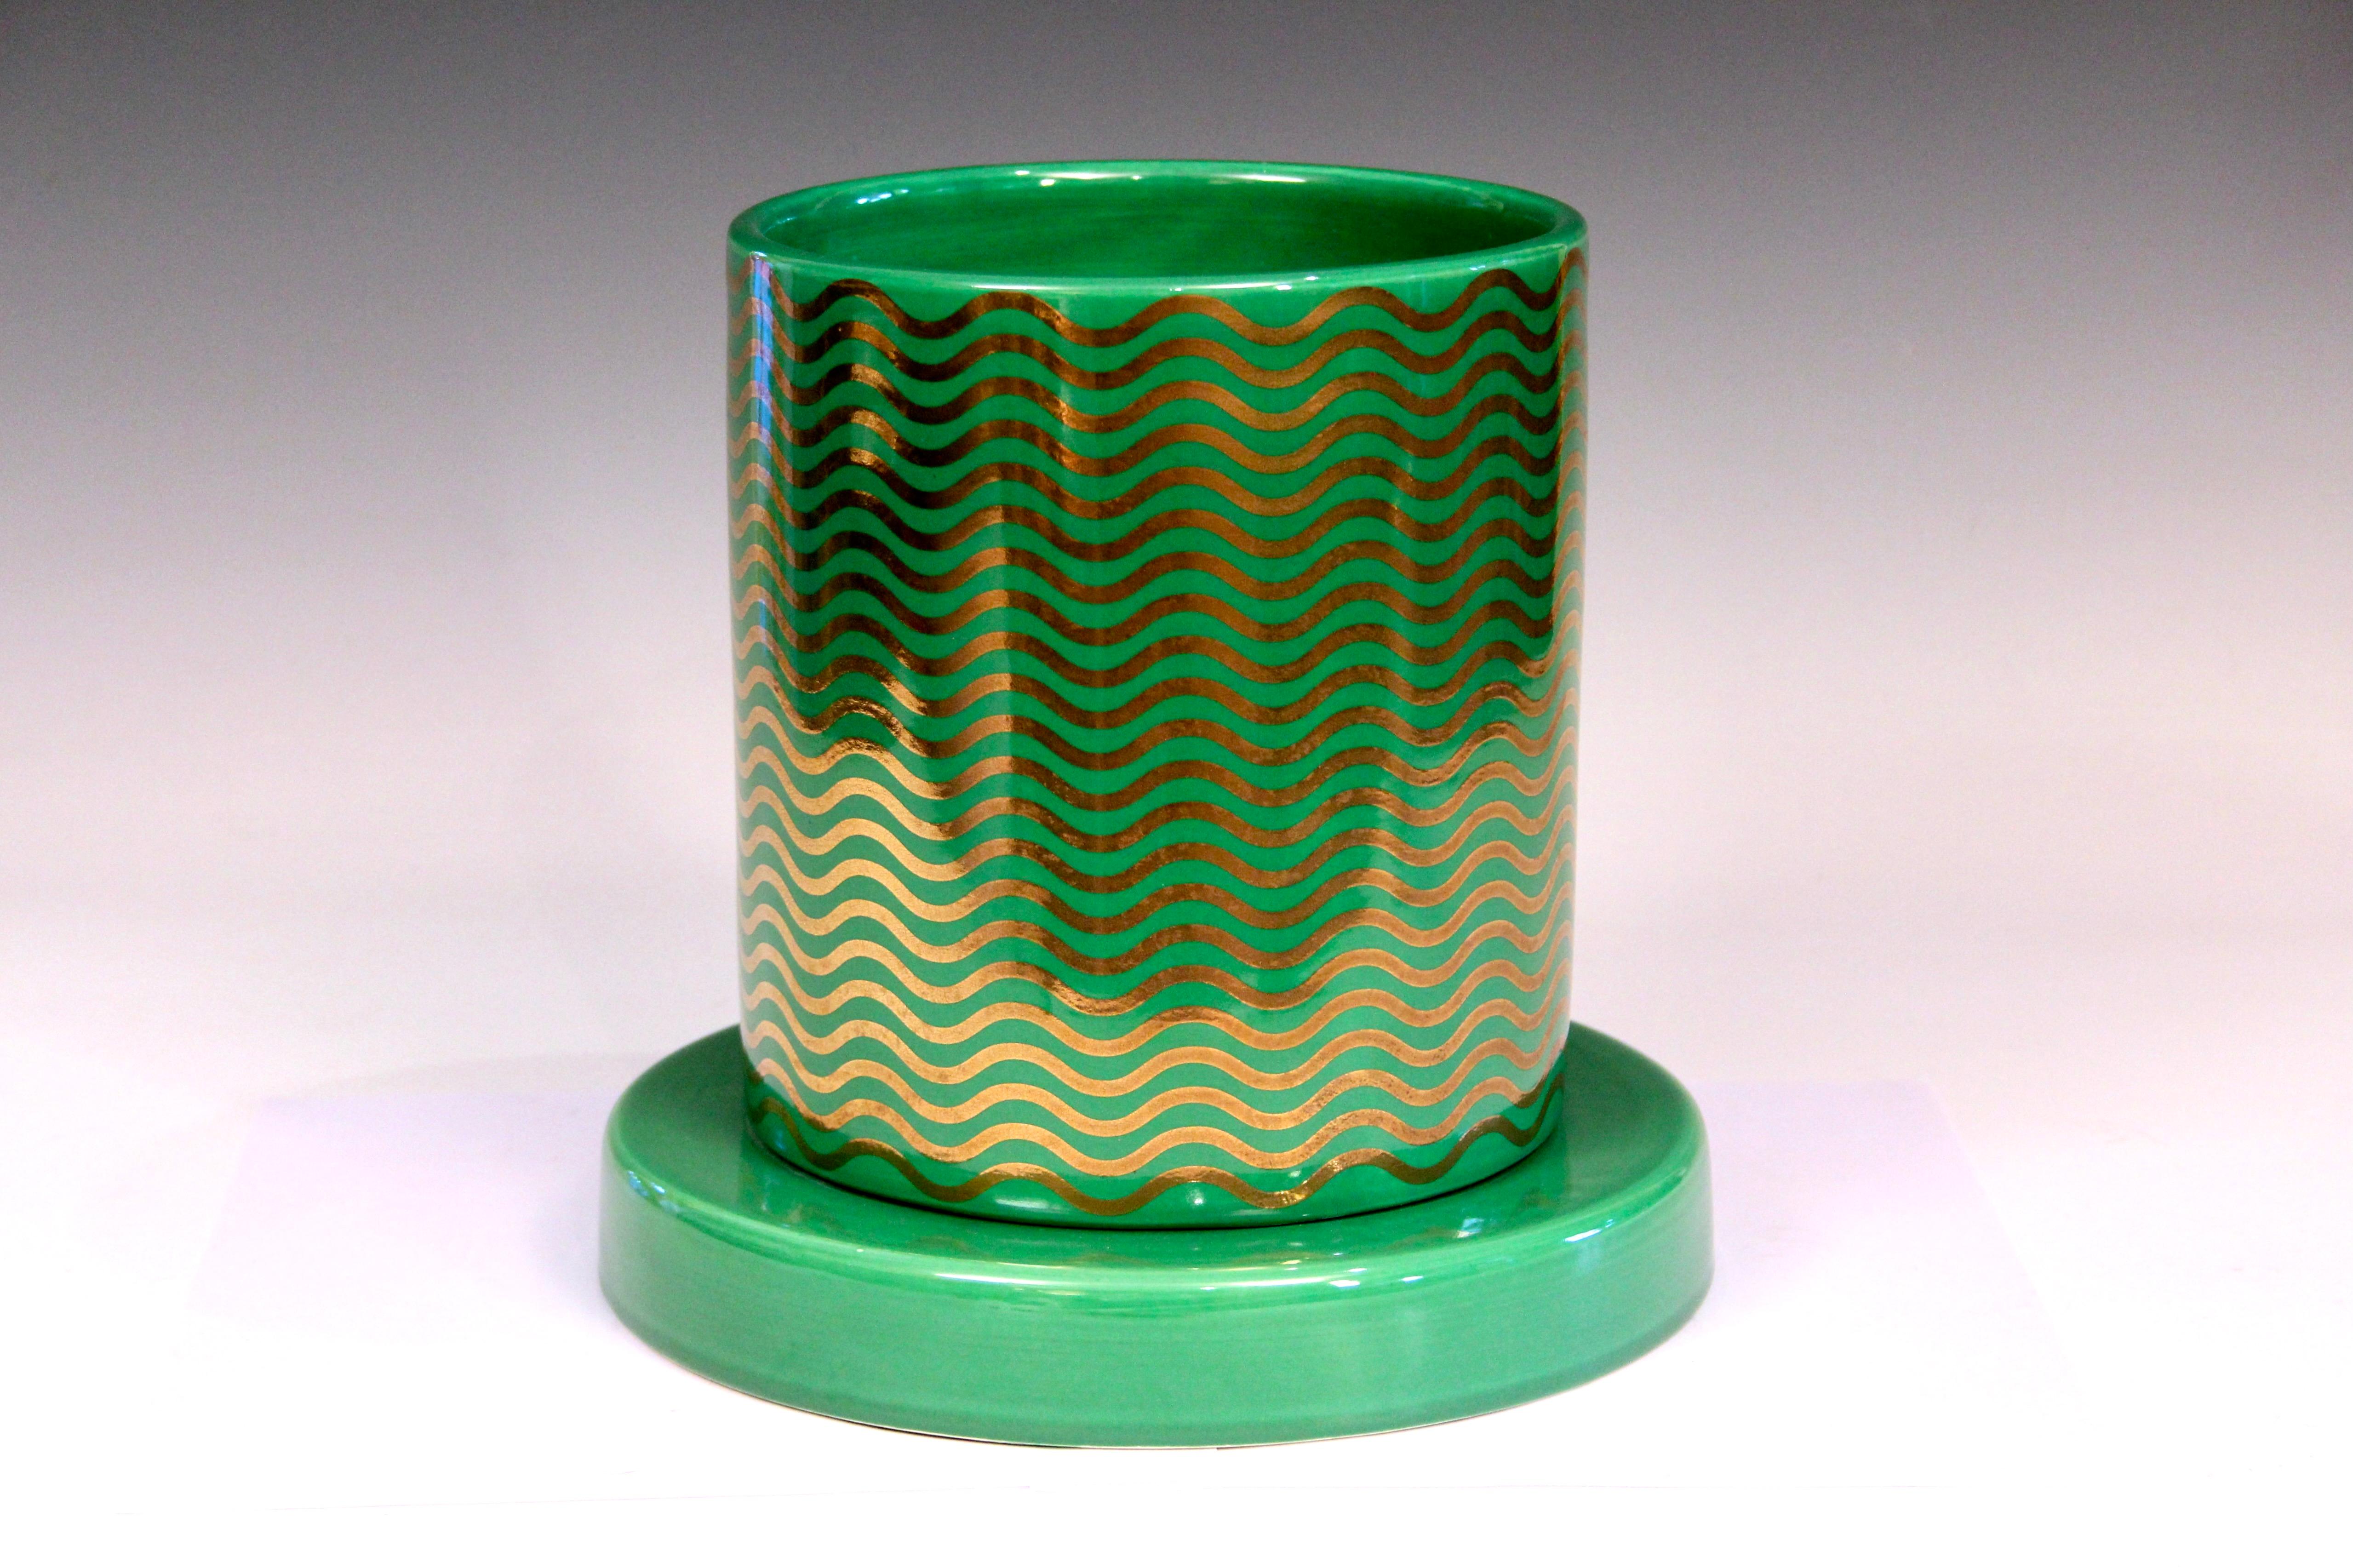 Ettore Sottsass Mediterreneo large vase or urn with gilt waves on a green glazed ground. From an edition of 15, dated 2000. Original Lavori in Corso label. Measures:  9